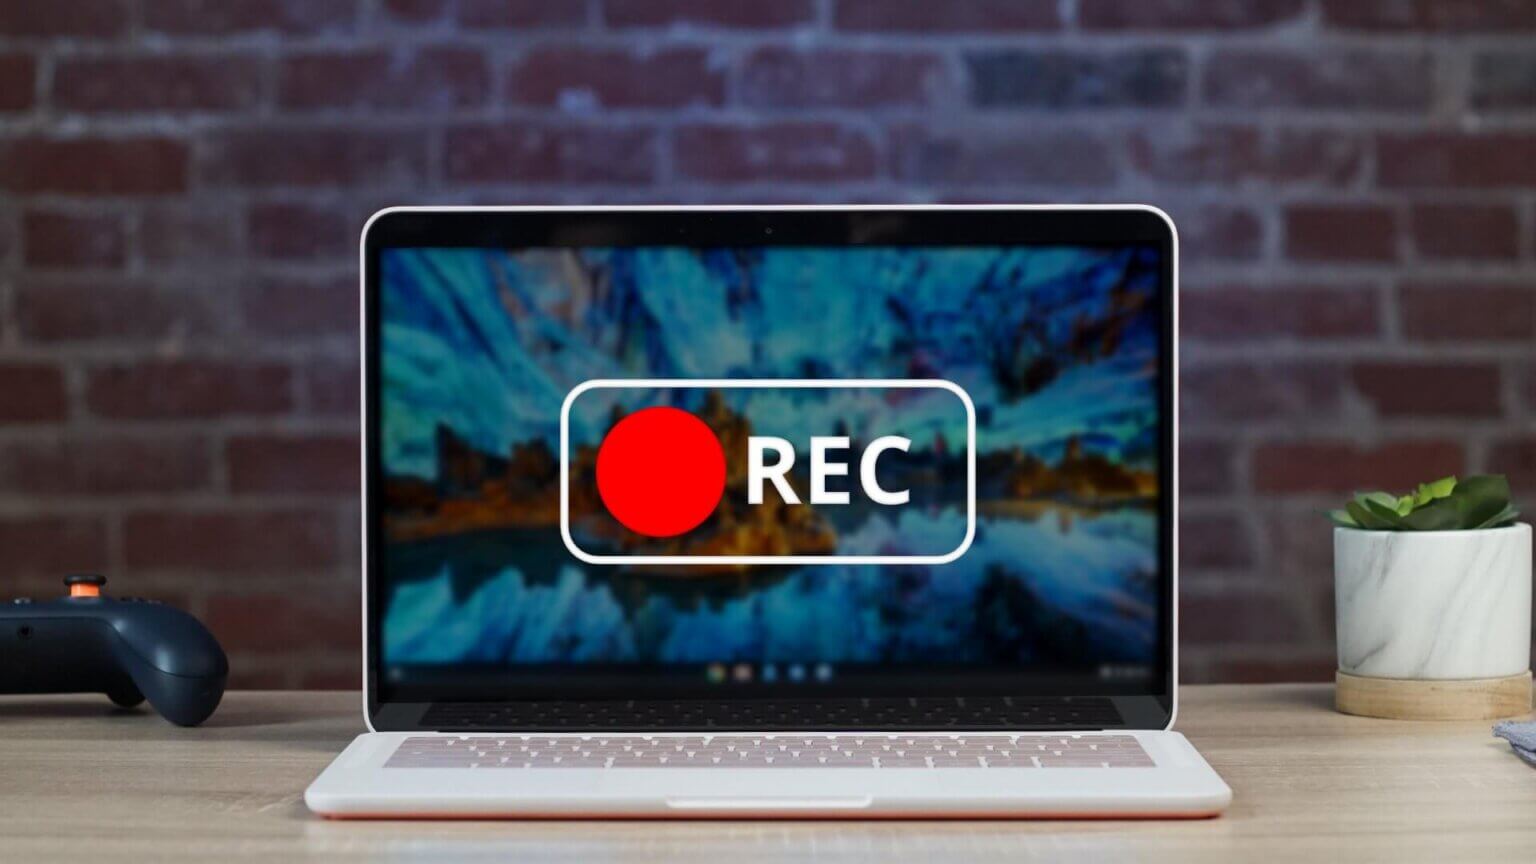 screen recorder for chrome